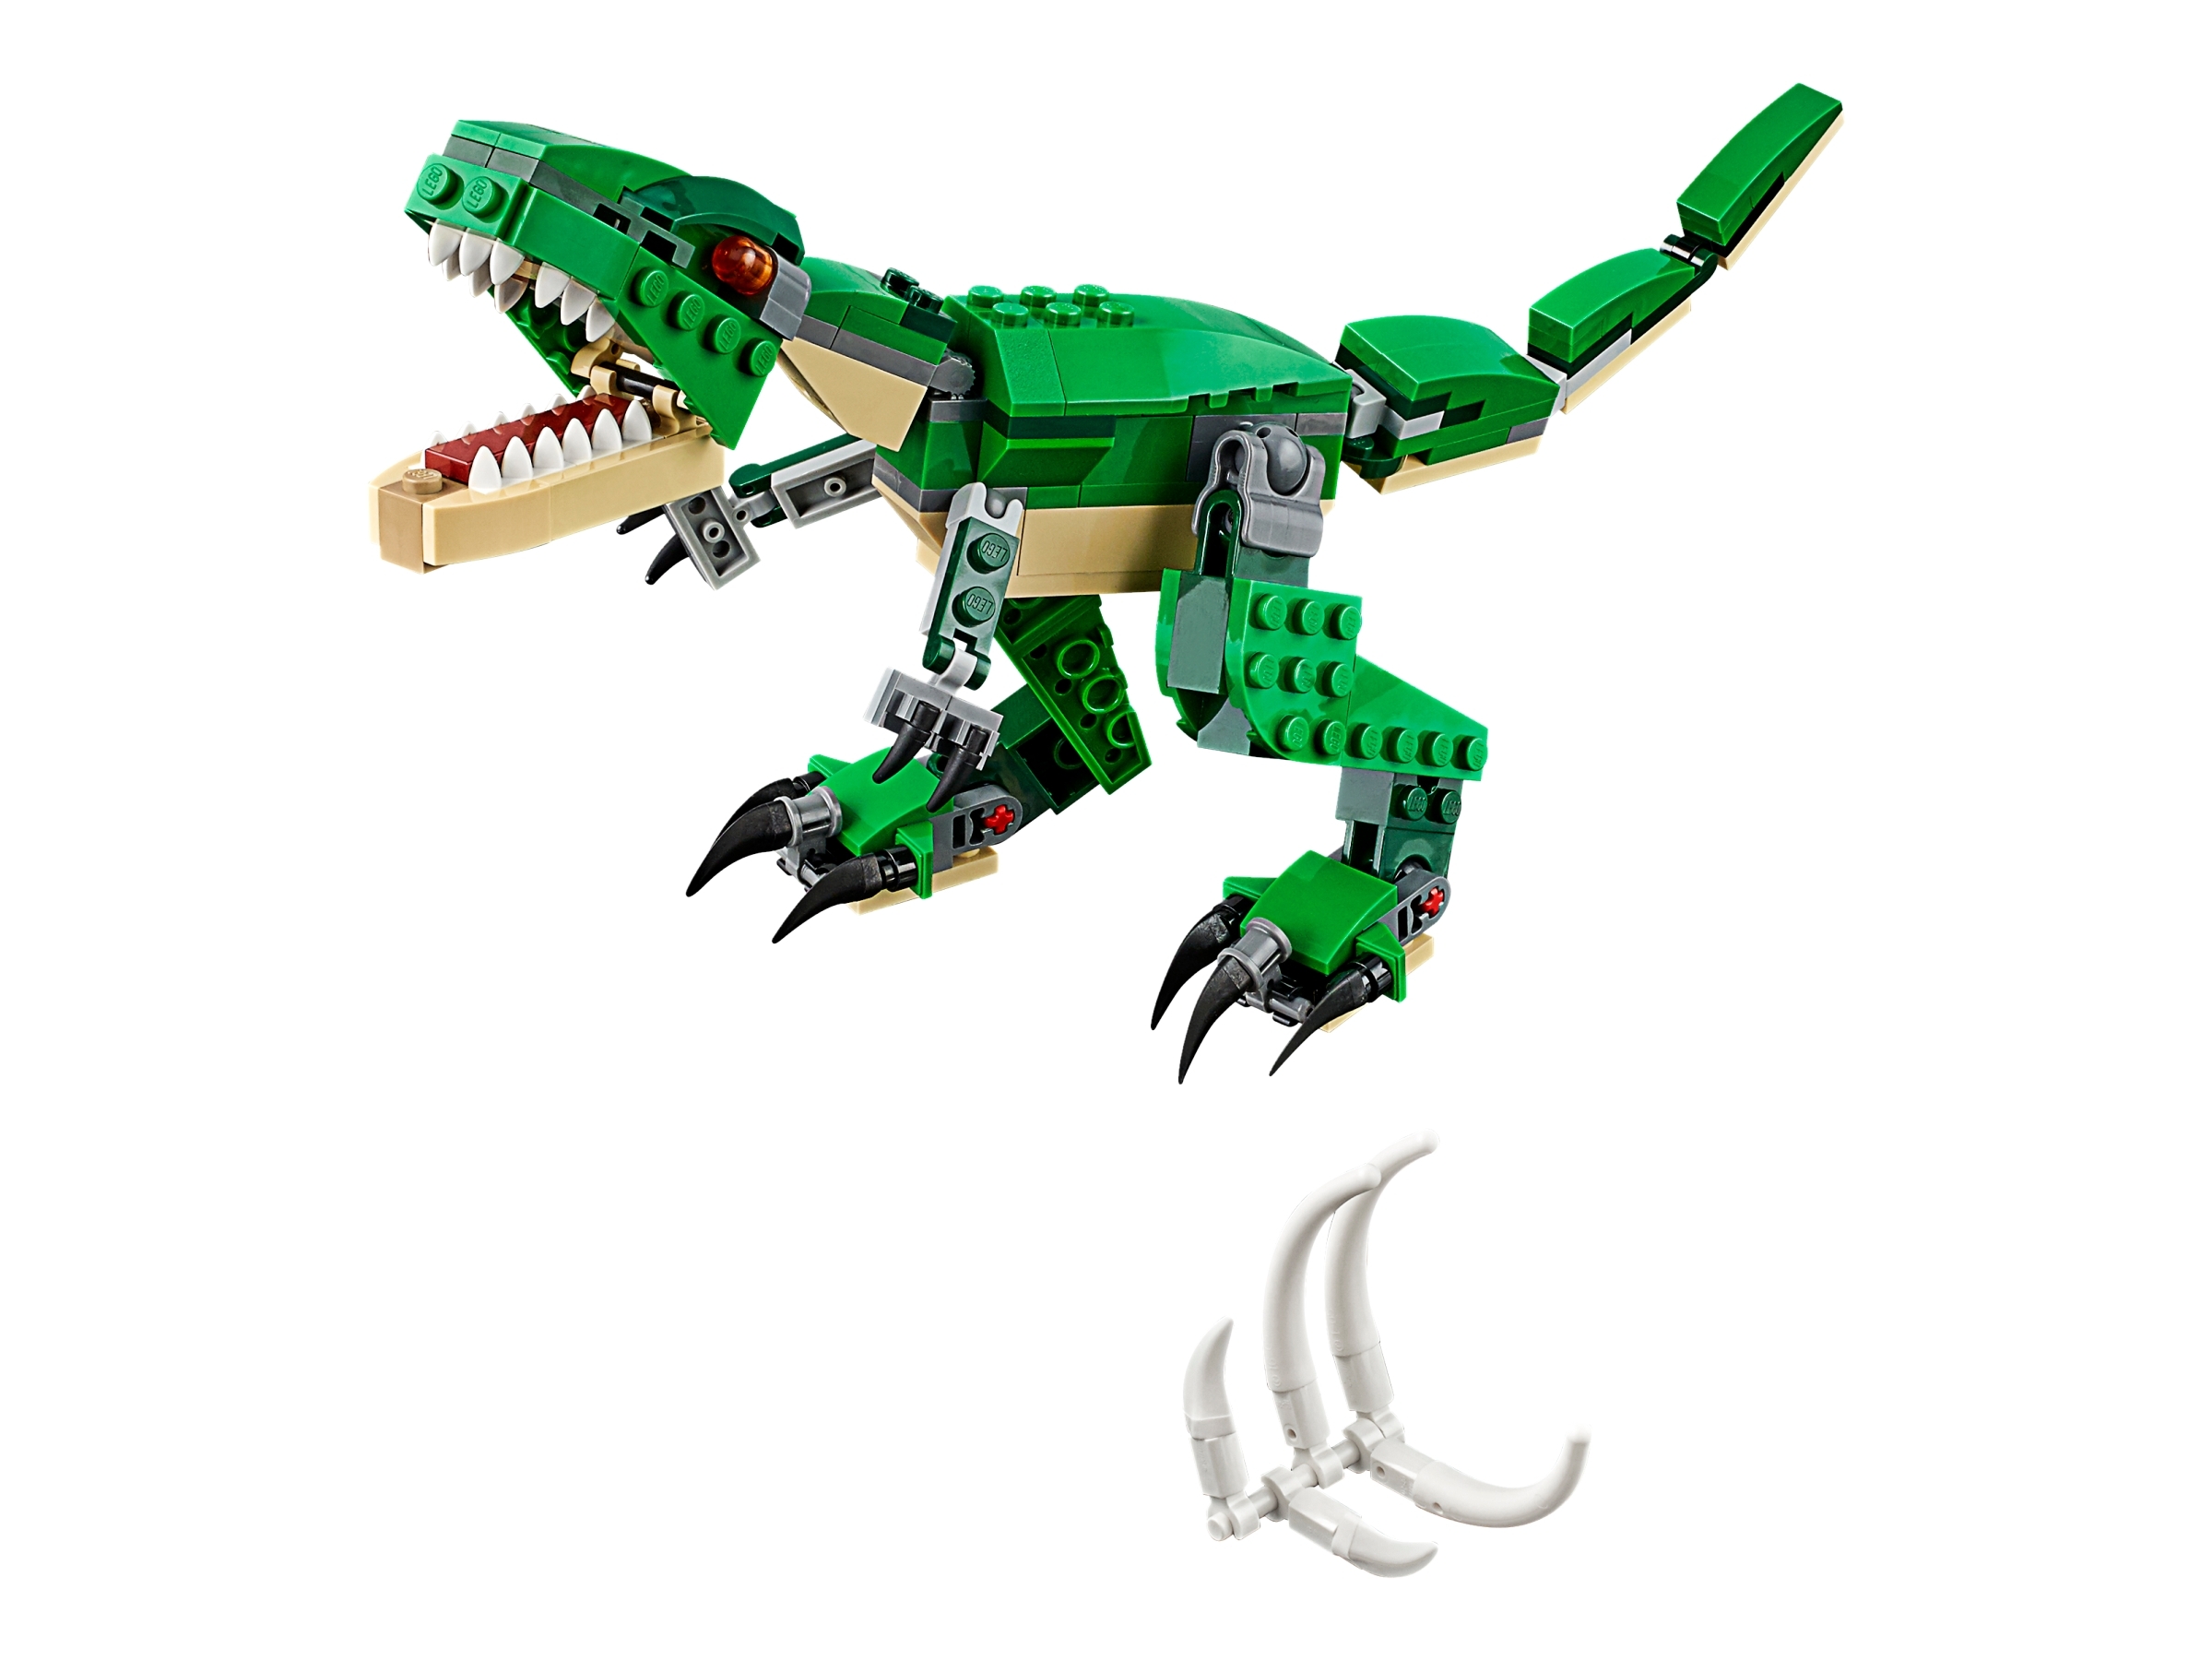 for sale online 31058 LEGO Mighty Dinosaurs LEGO Creator